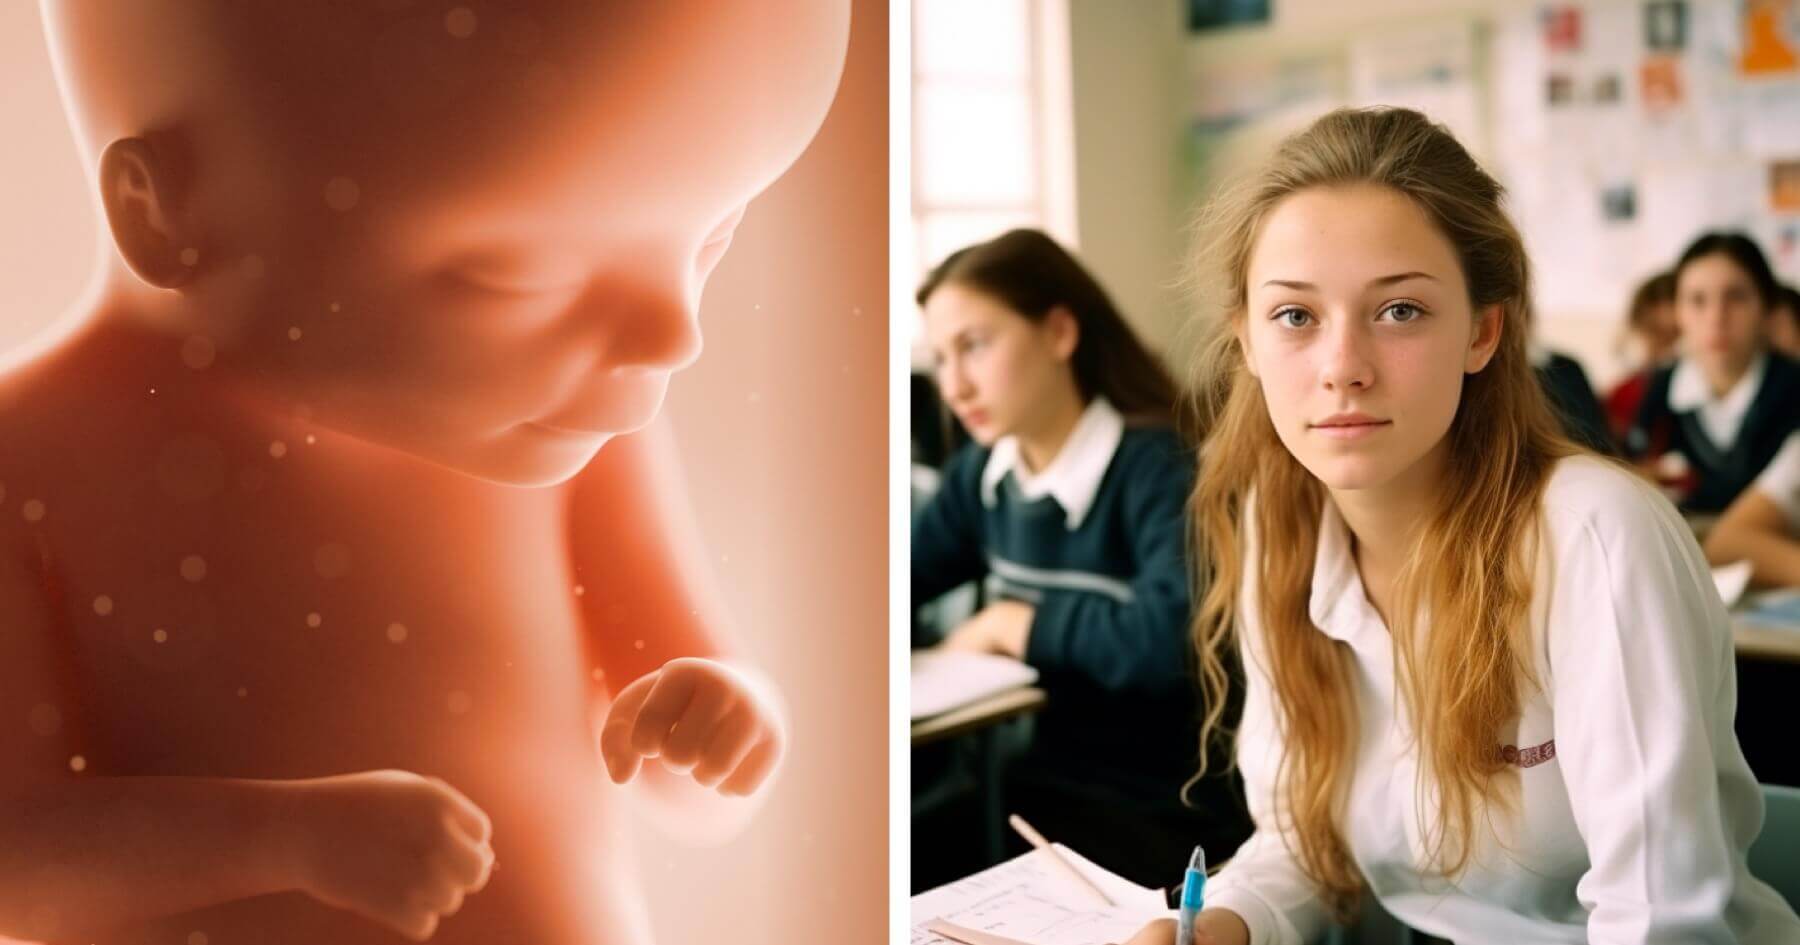 Ask your MP to vote against forcing NI schools to teach about abortion share